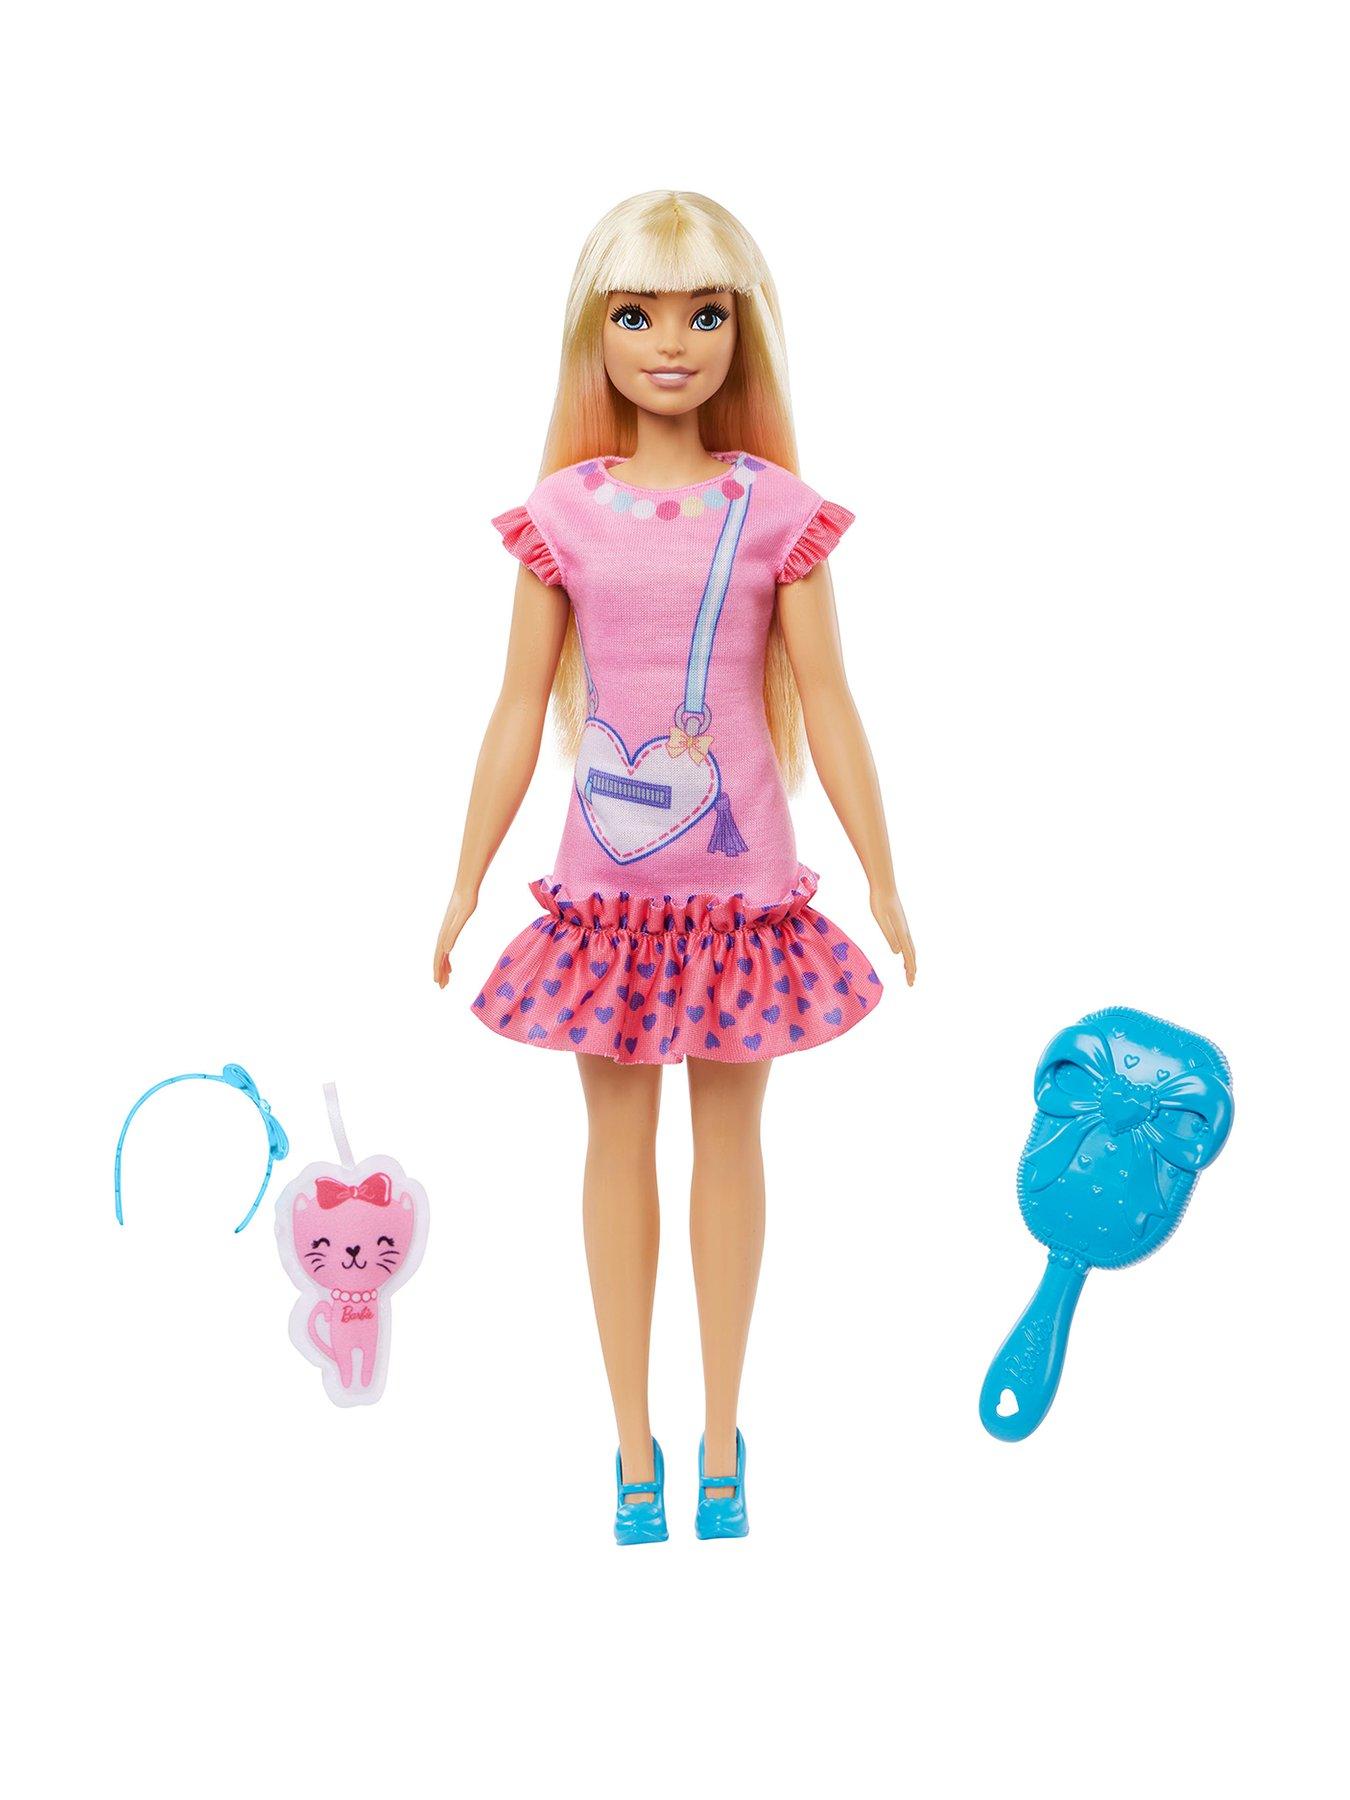 Barbie: My First Barbie Clothes, Fashion Pack for 13.5-inch Preschool  Dolls, Tutu Leotard with Ballet and Dance Accessories